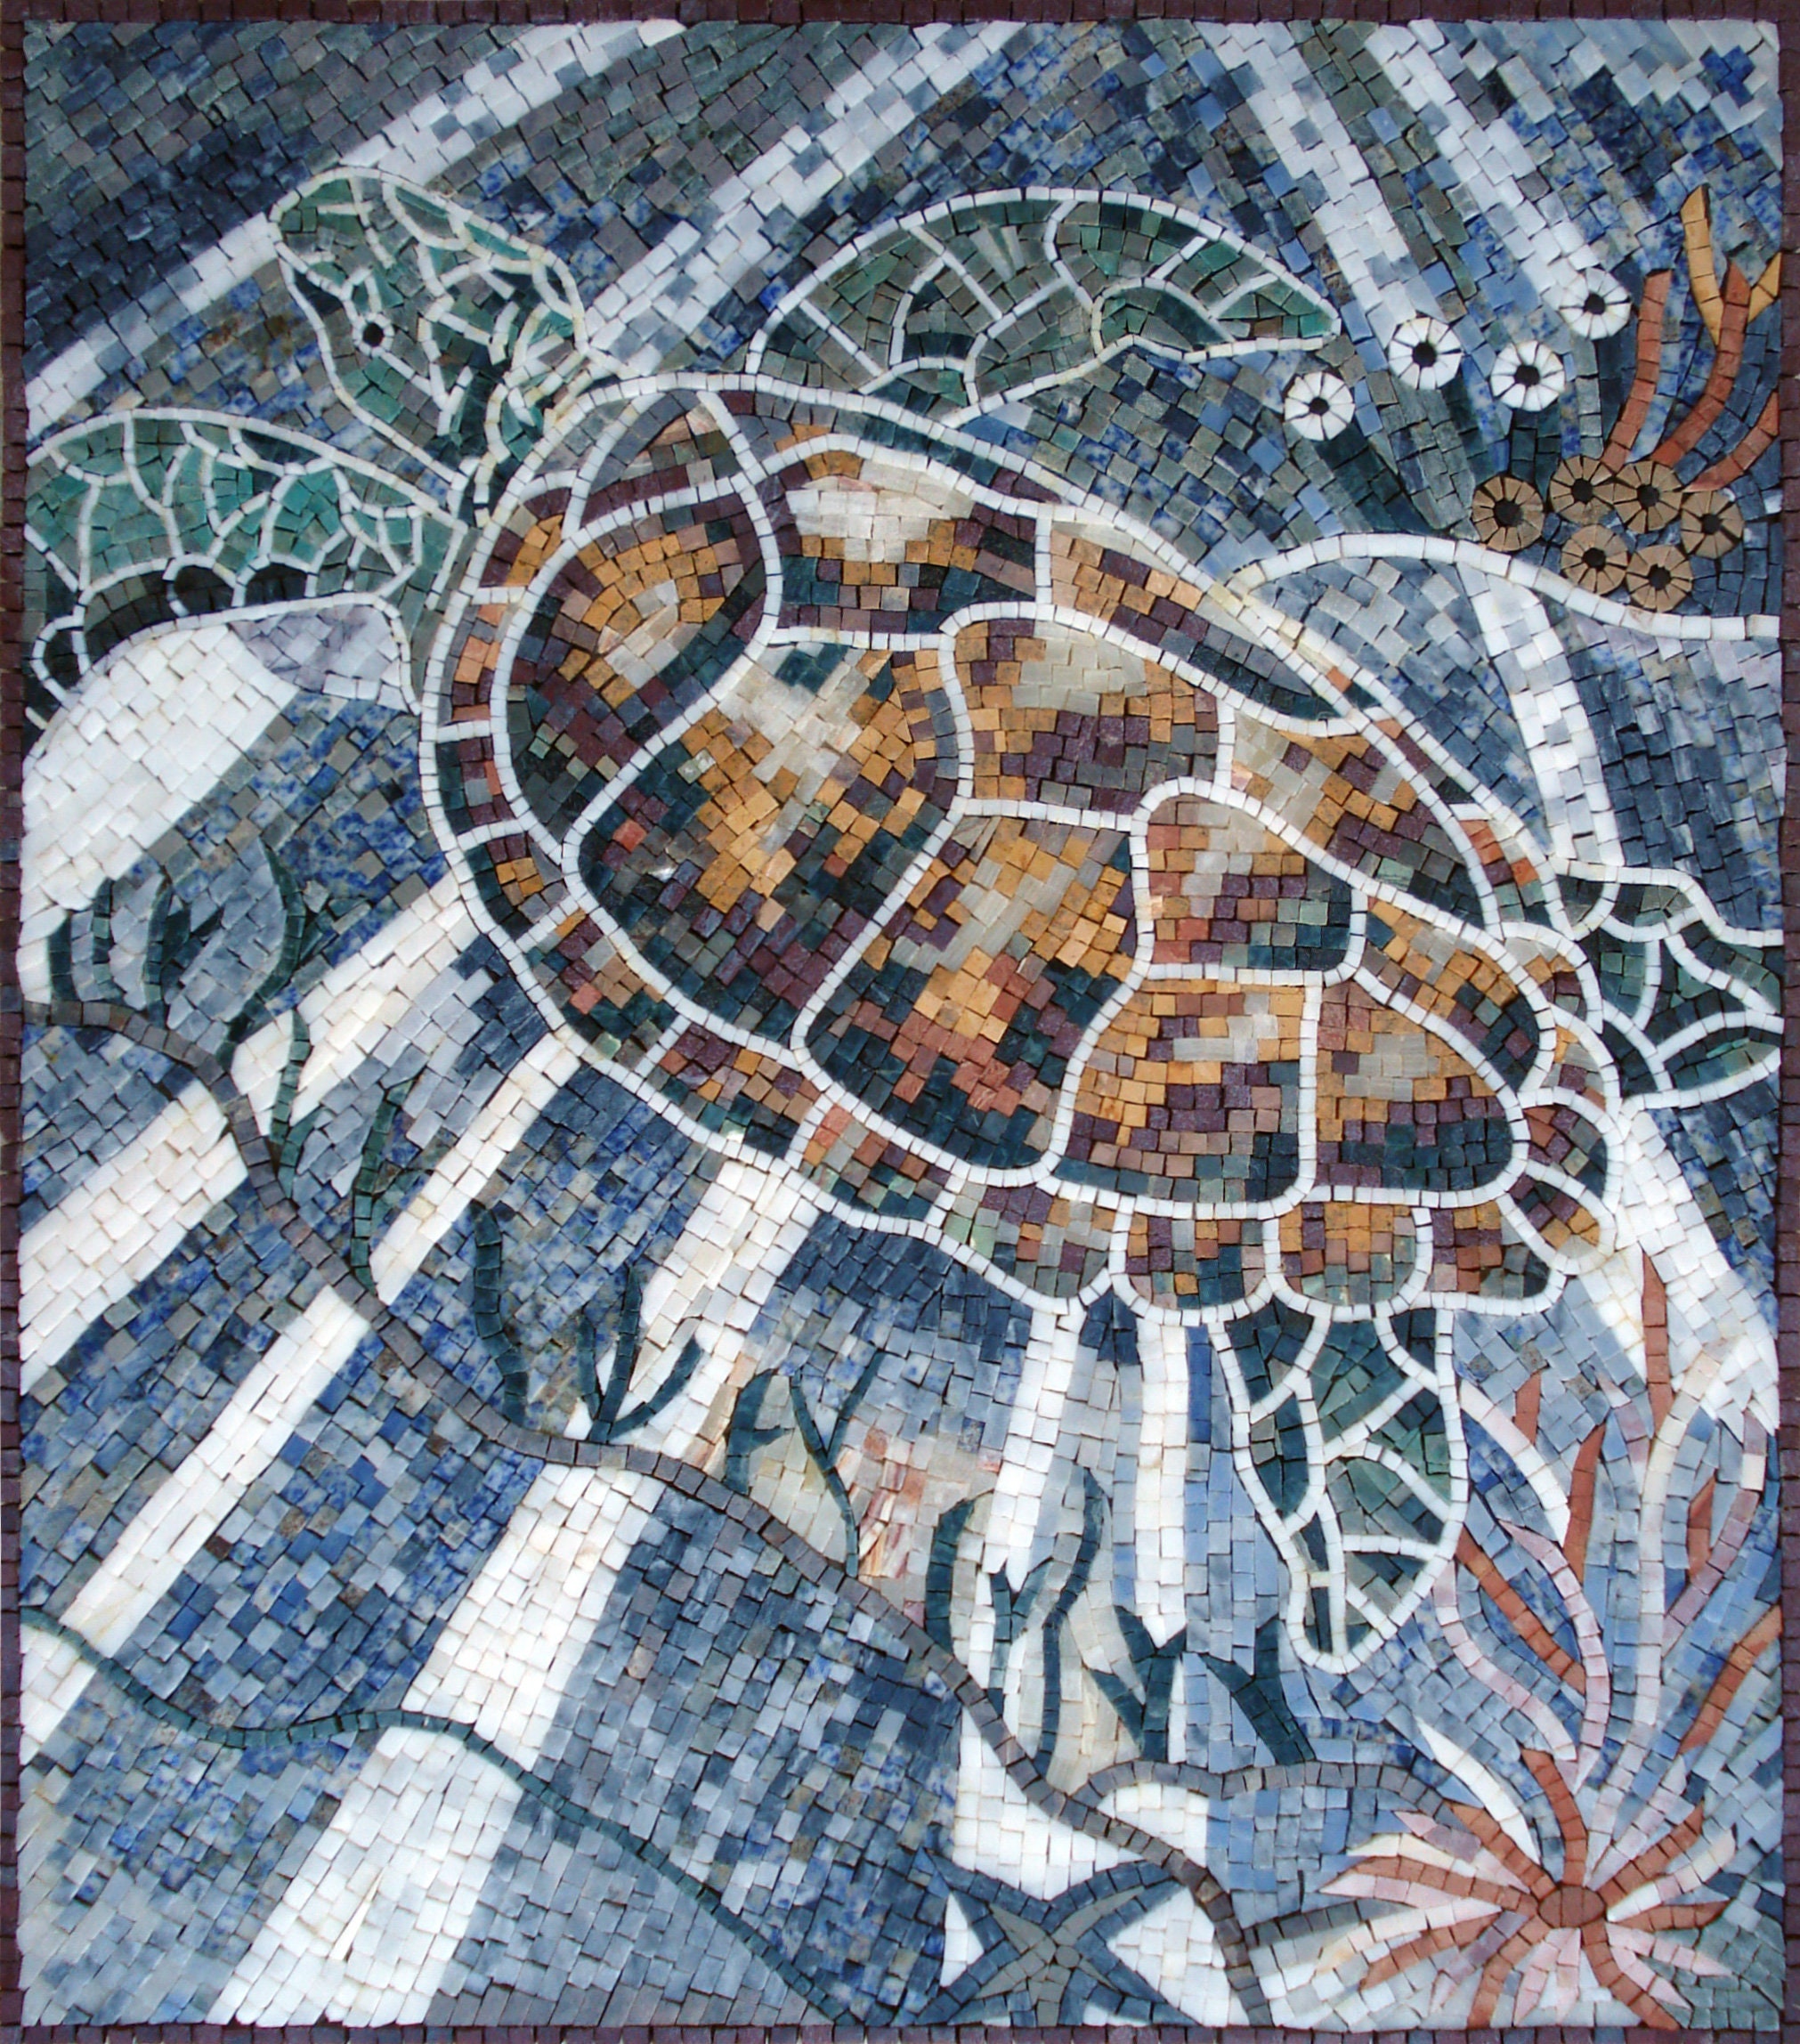 Buy Mosaic Turtle Online In India Etsy India